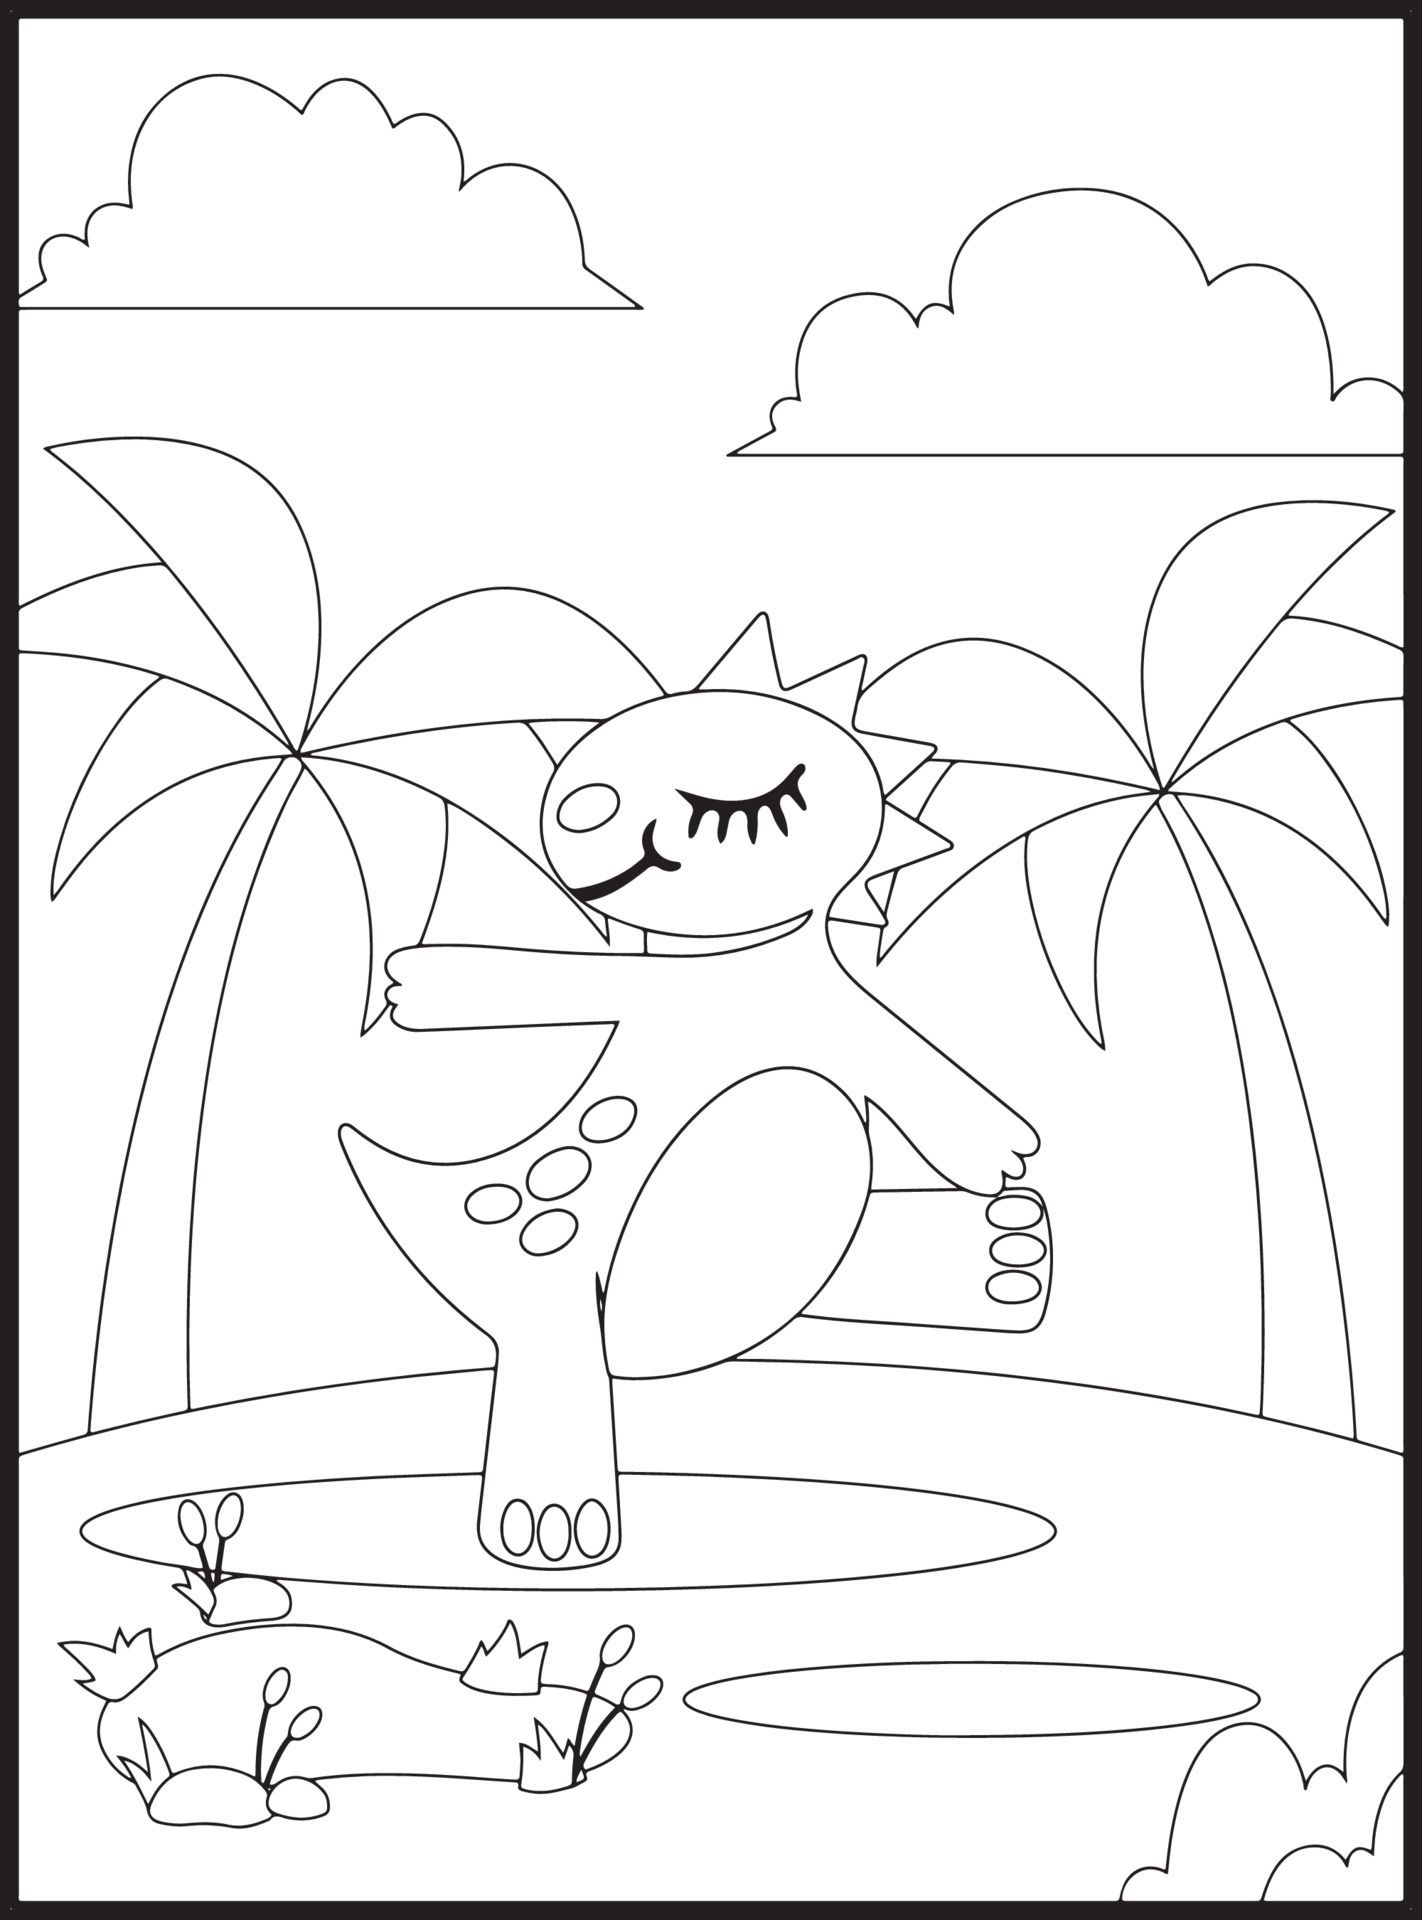 190 Cute Dinosaur Coloring Pages: Roaring Fun for Kids 108